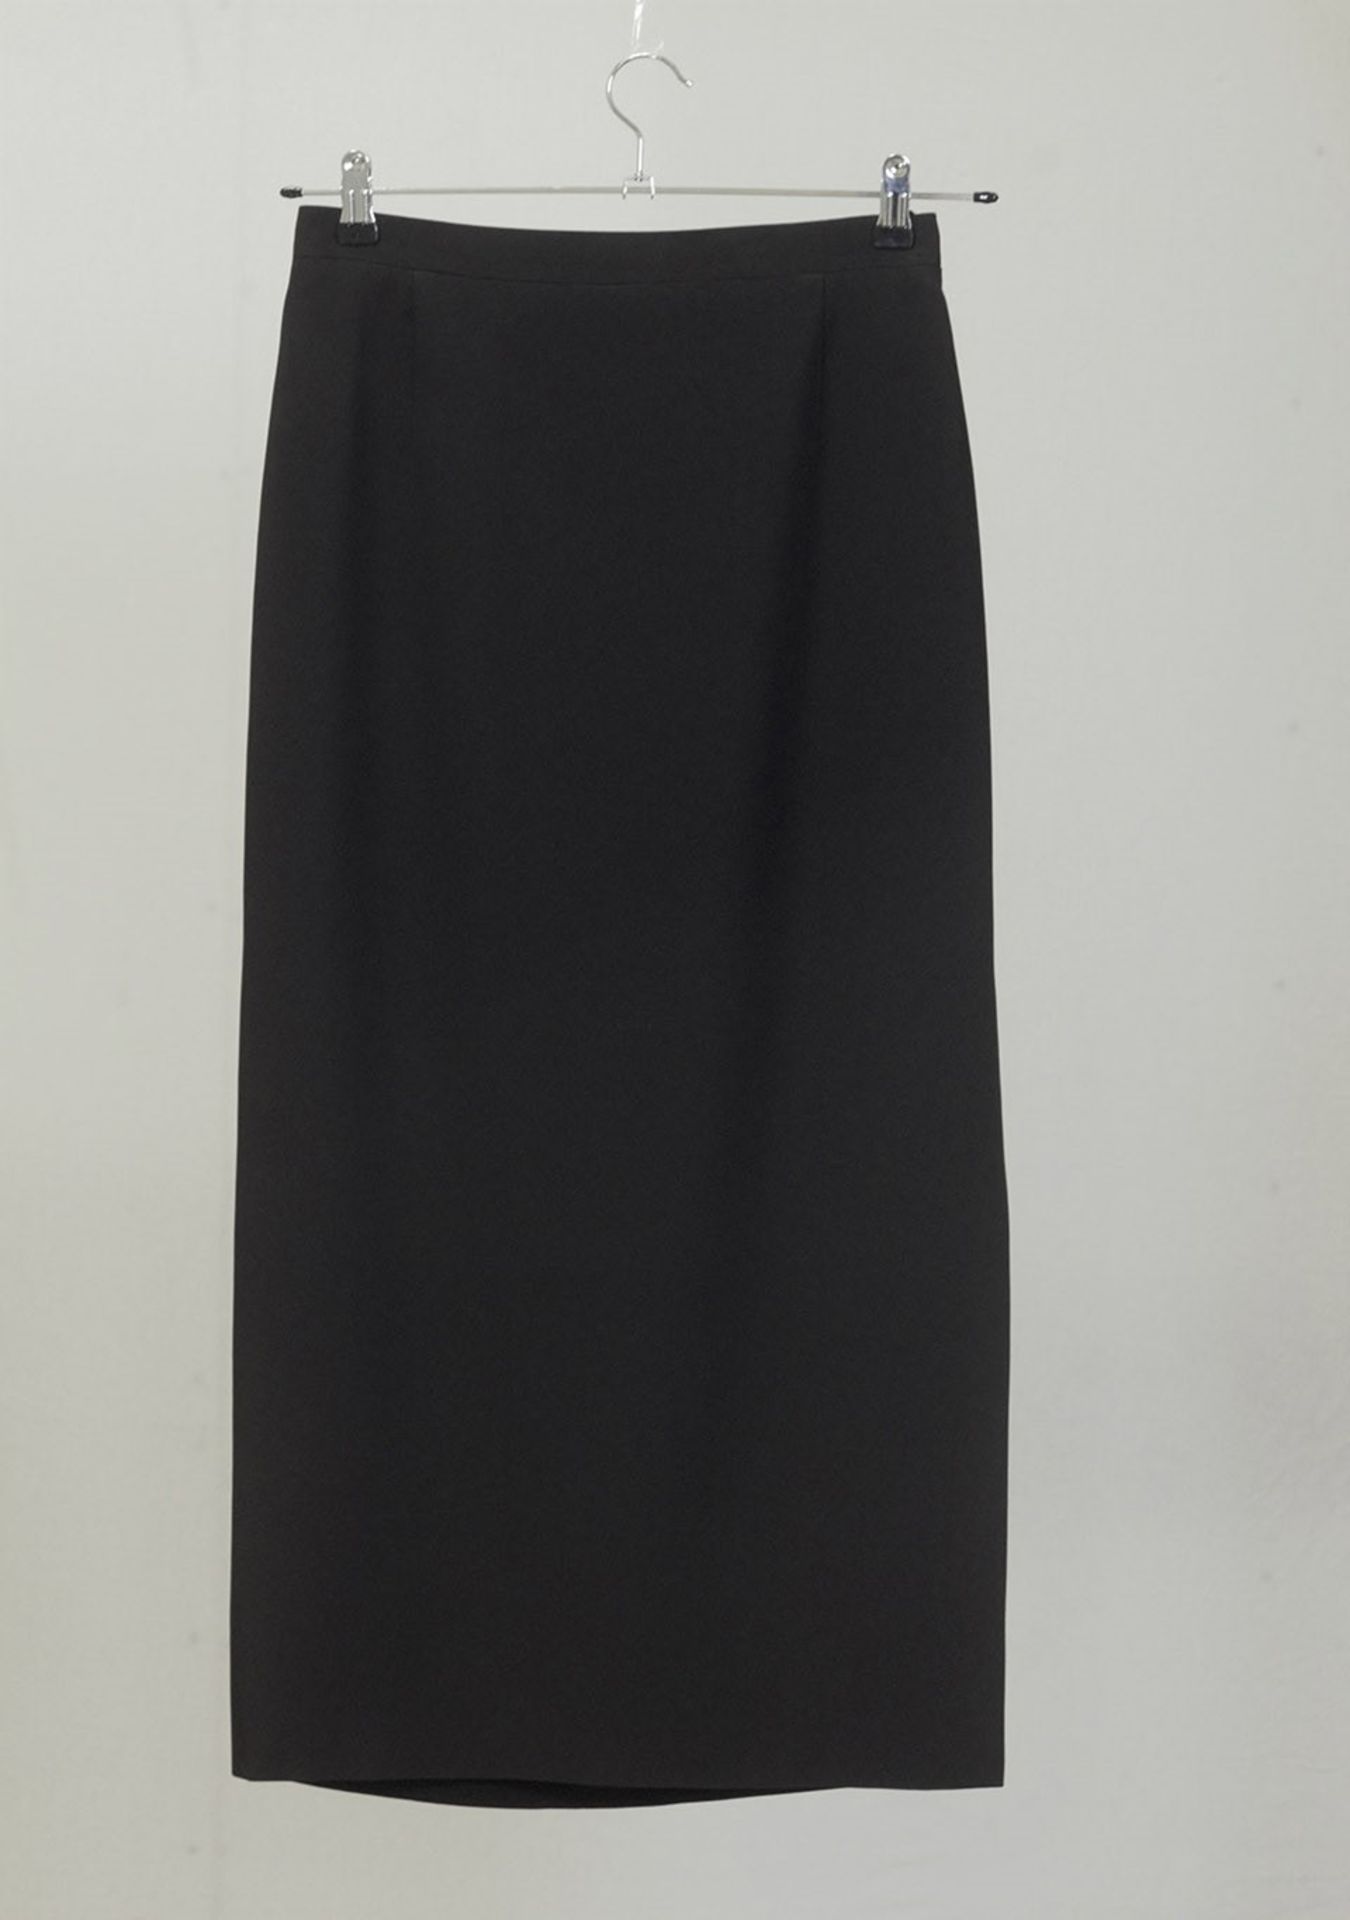 1 x Boutique Le Duc Black Skirt - From a High End Clothing Boutique In The Netherlands - - Image 5 of 7